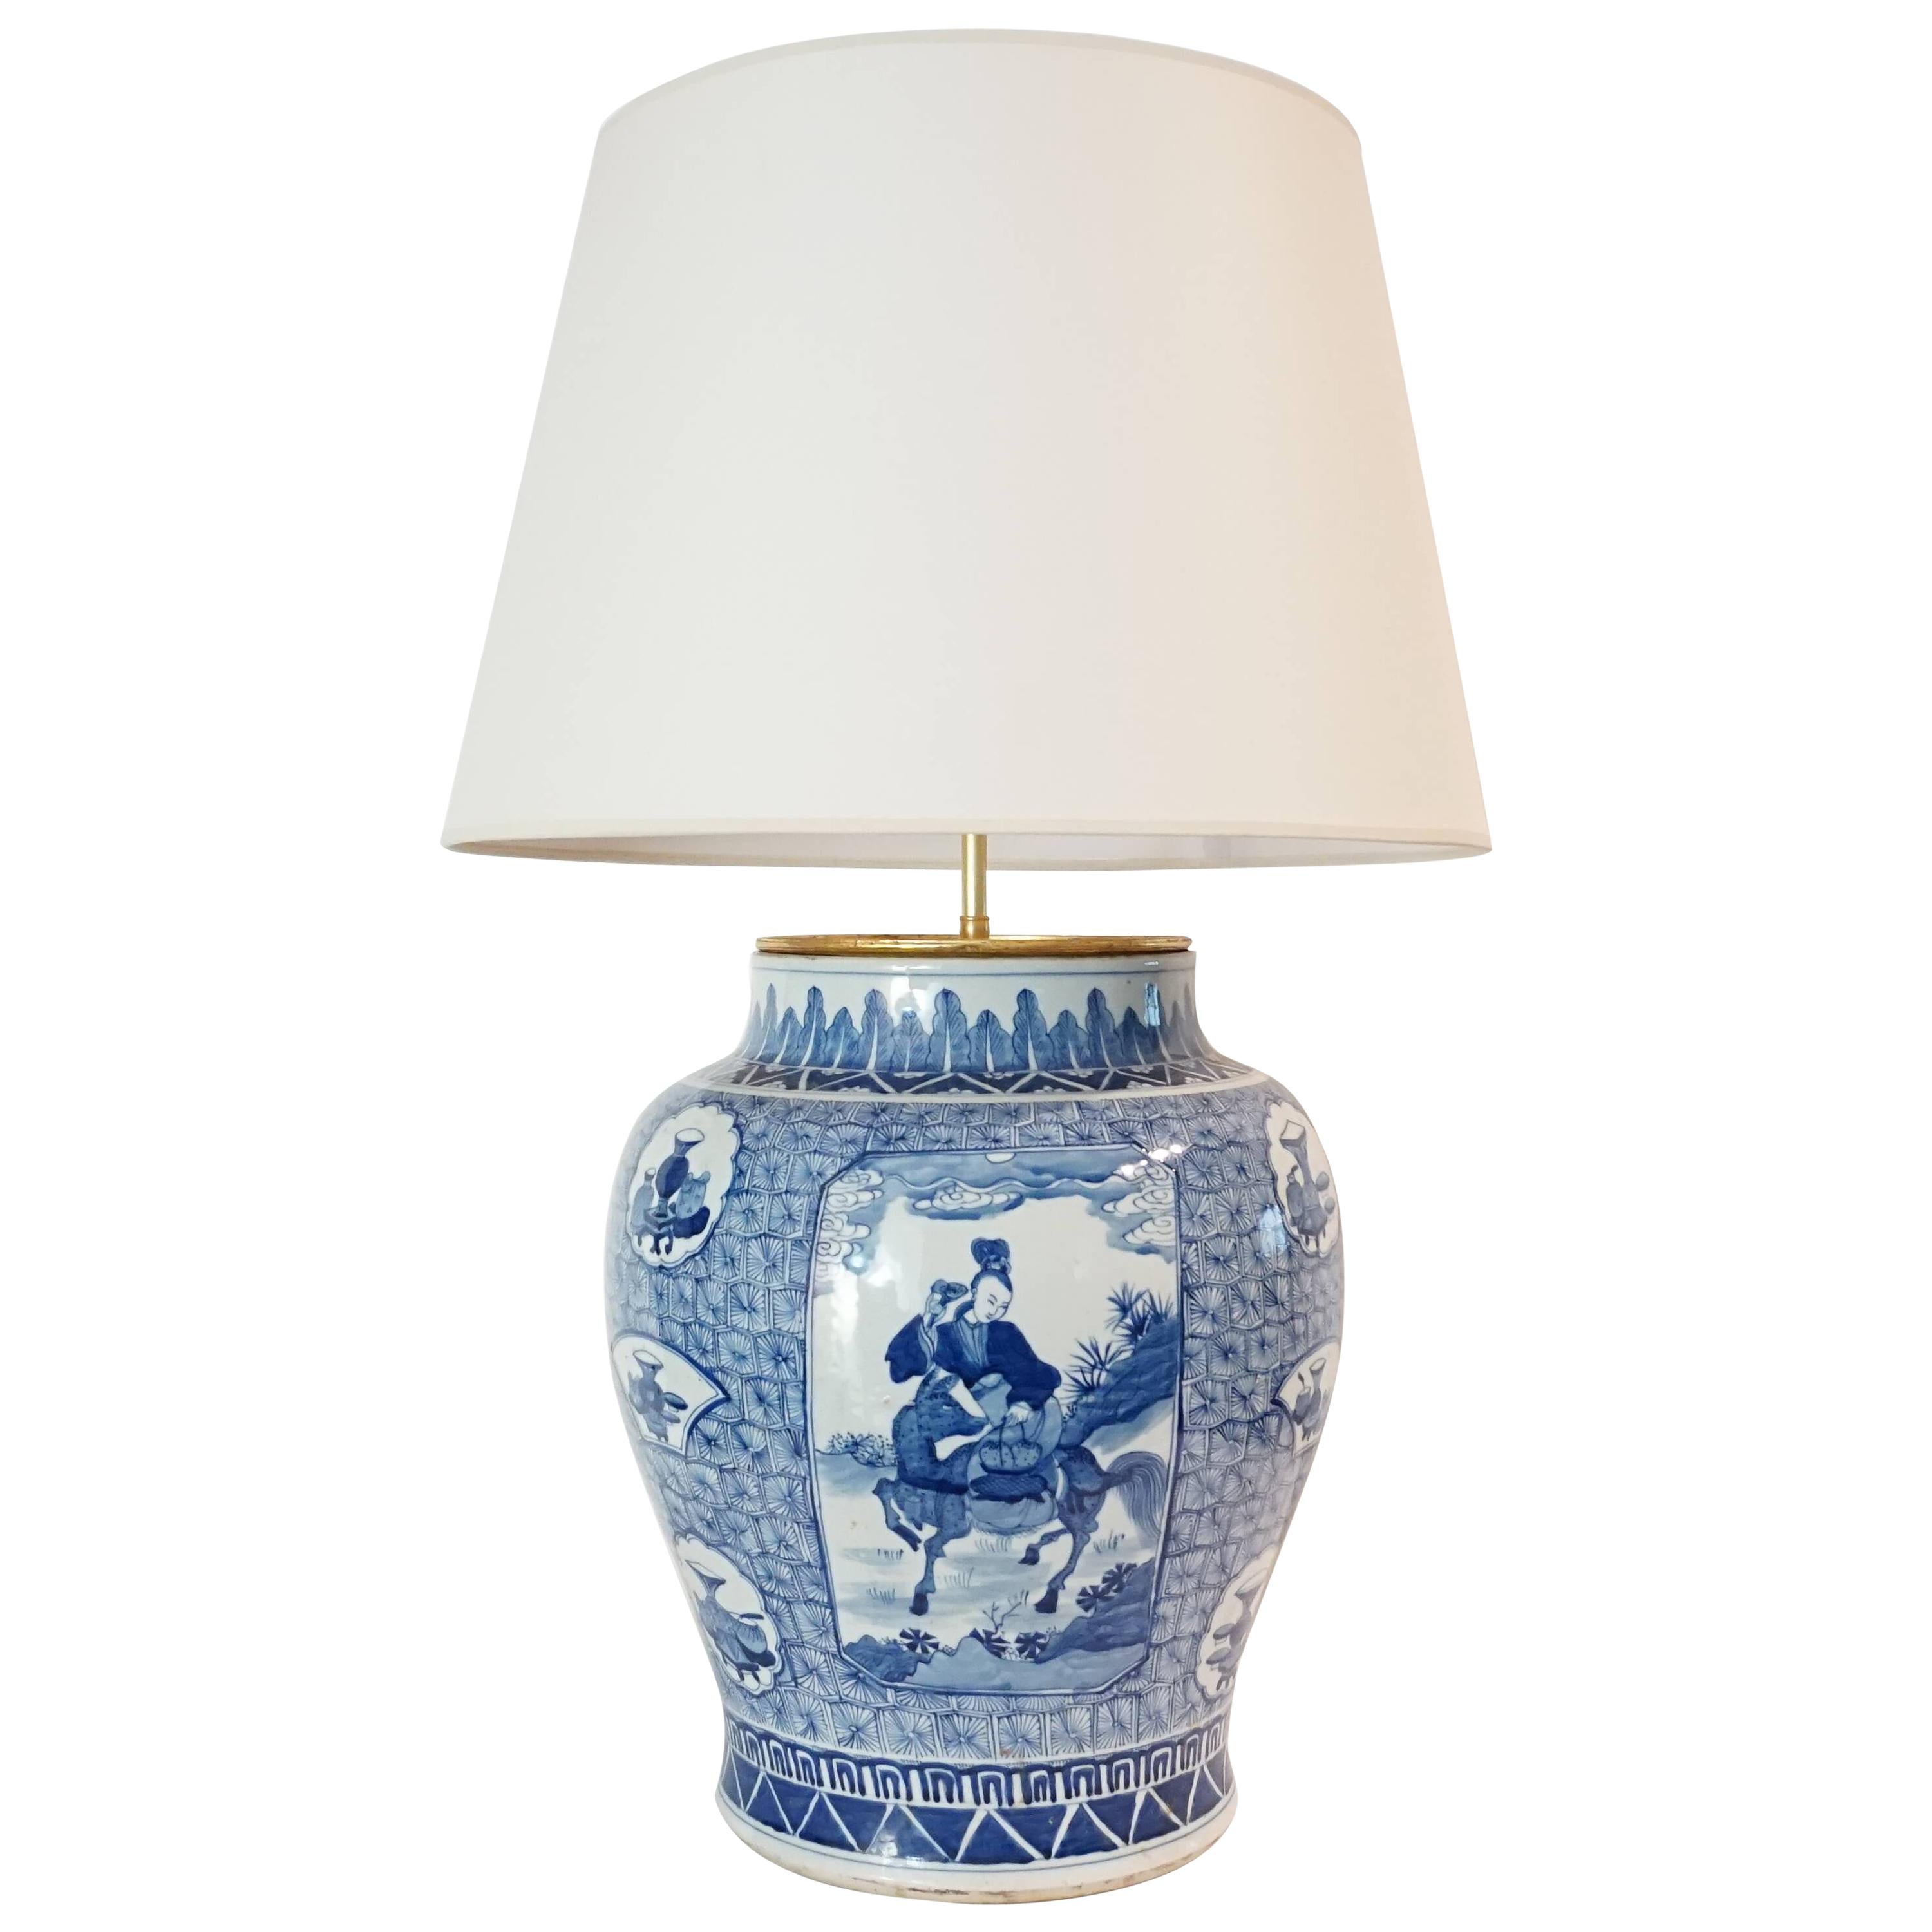 Chinese Qing Dynasty Blue and White Jar Vase Table Lamp